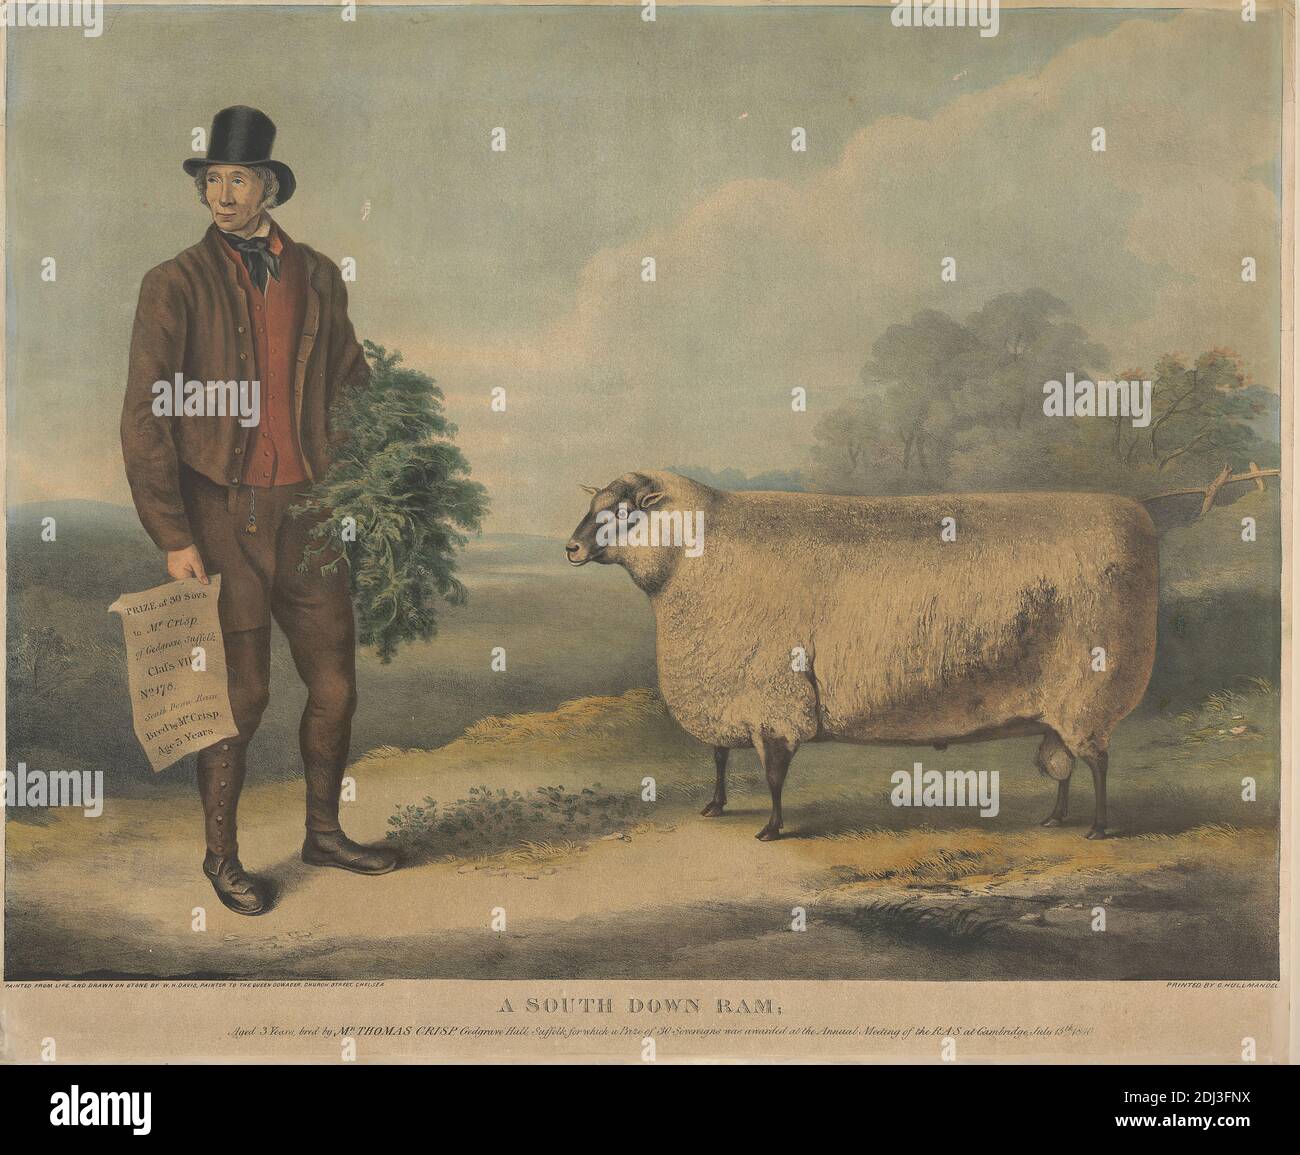 A South Down Ram; Aged 3 Years, bred by Mr. Thomas Crisp, Gedgrave Hall, Suffolk, for which a Prize of 30 Severeigns was awarded at the Annual Meeting of the R.A.S. at Cambridge, July 15th 1840, William Henry Davis, active 1803–1849, British, after William Henry Davis, active 1803–1849, British, 1840, Hand colored lithograph, Sheet: 18 1/2 x 24 1/4in. (47 x 61.6cm Stock Photo